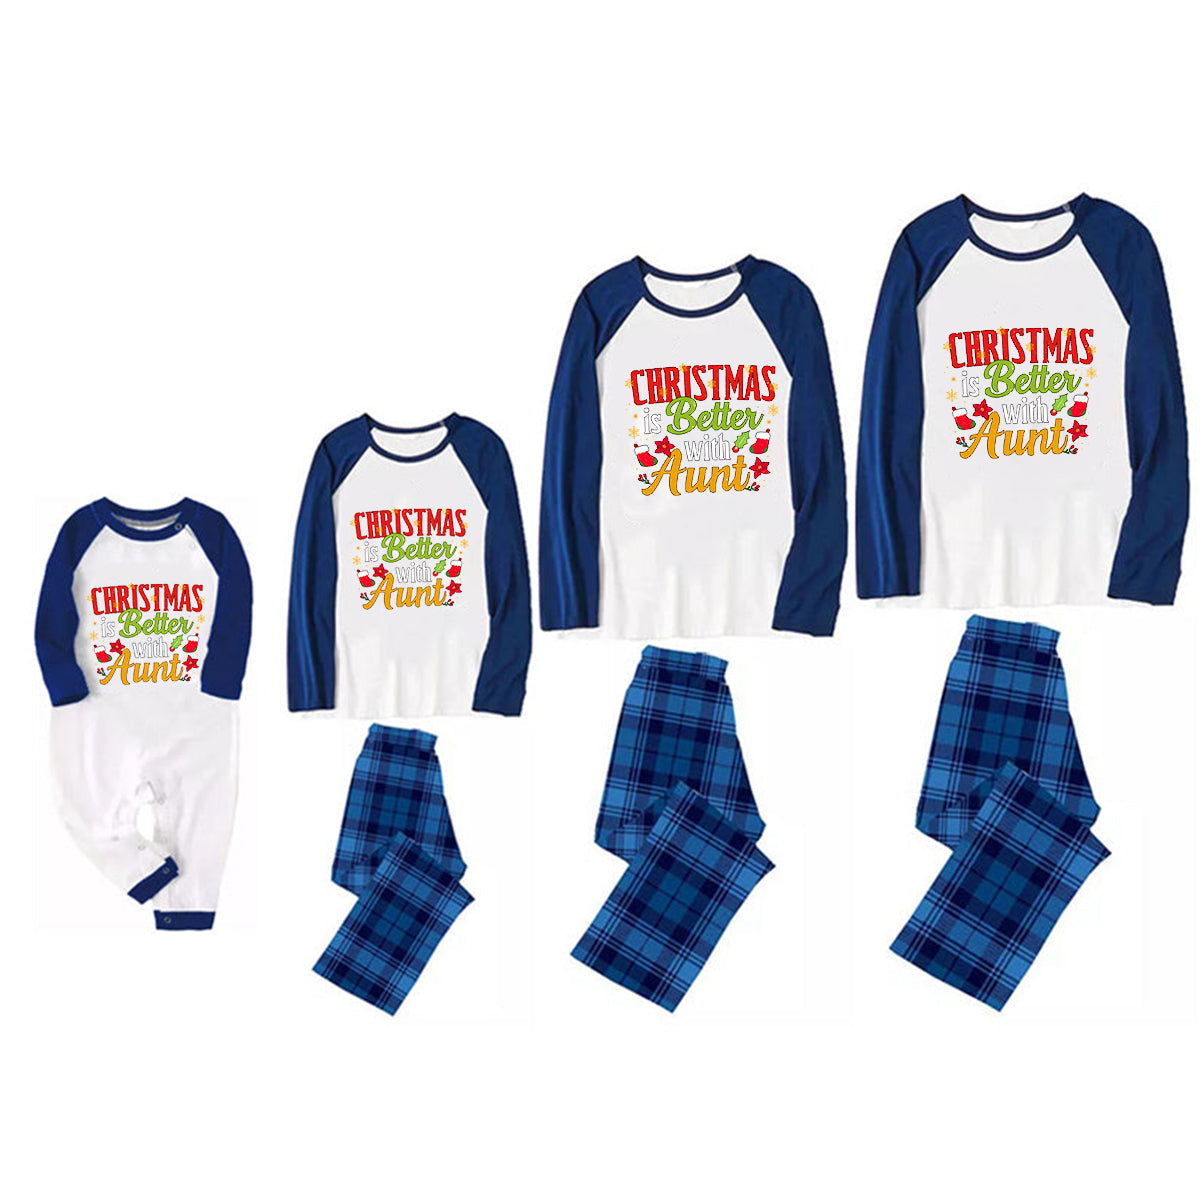 Christmas Cute Cartoon Patterned and 'CHRISTMAS Is Better With Aunt‘ Letter Print Casual Long Sleeve Sweatshirts Contrast Blue & White Top and Black and Blue Plaid Pants Family Matching Pajamas Sets